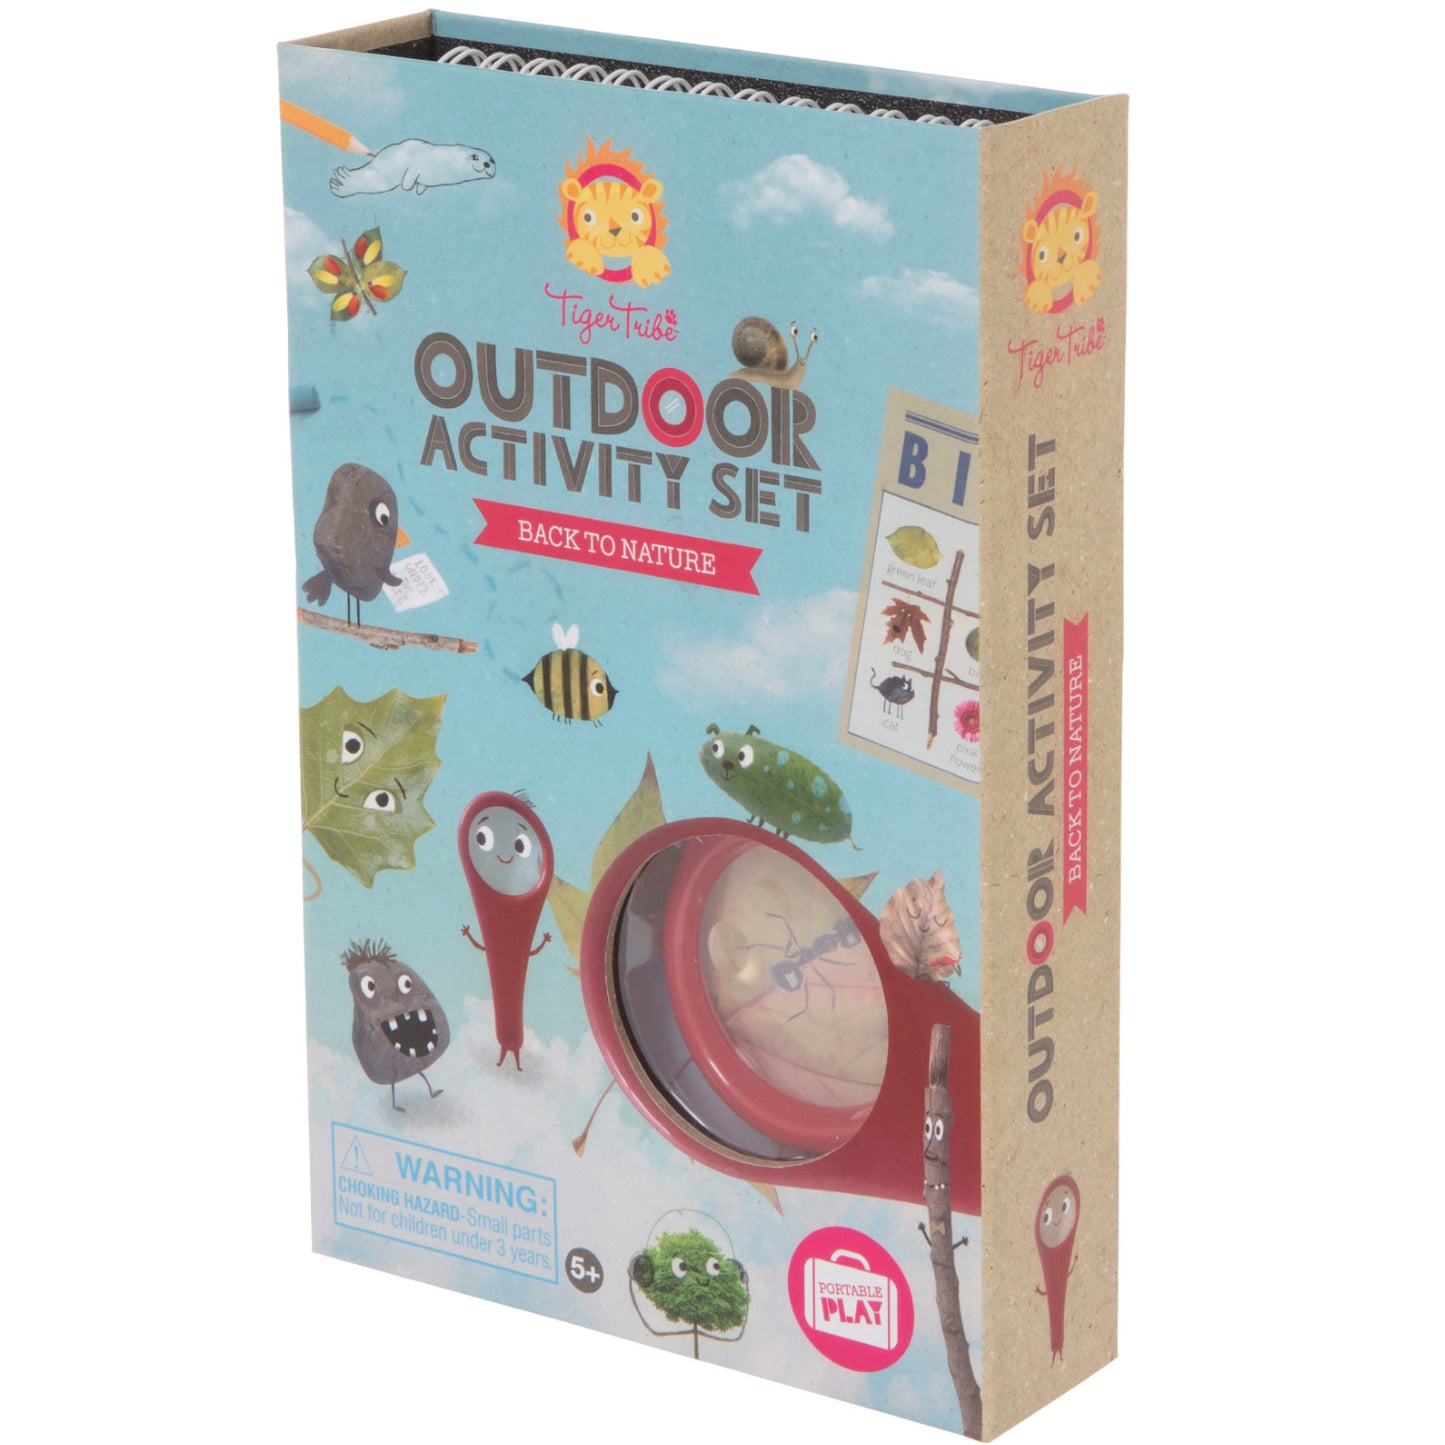 Tiger Tribe Outdoor Activity Set  Back to Nature